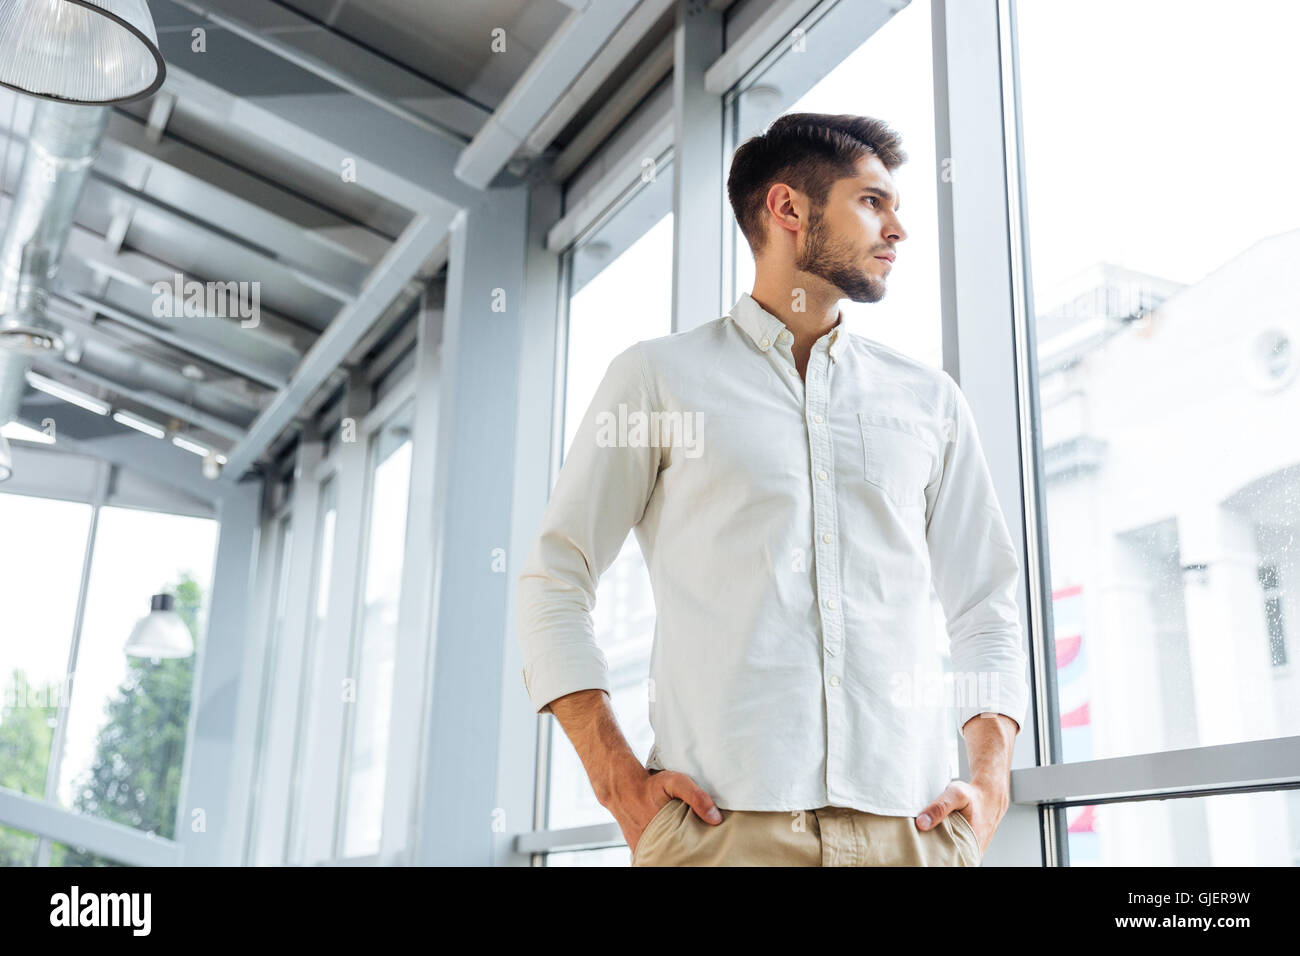 Serious pensive young man standing and thinking near the window Stock Photo